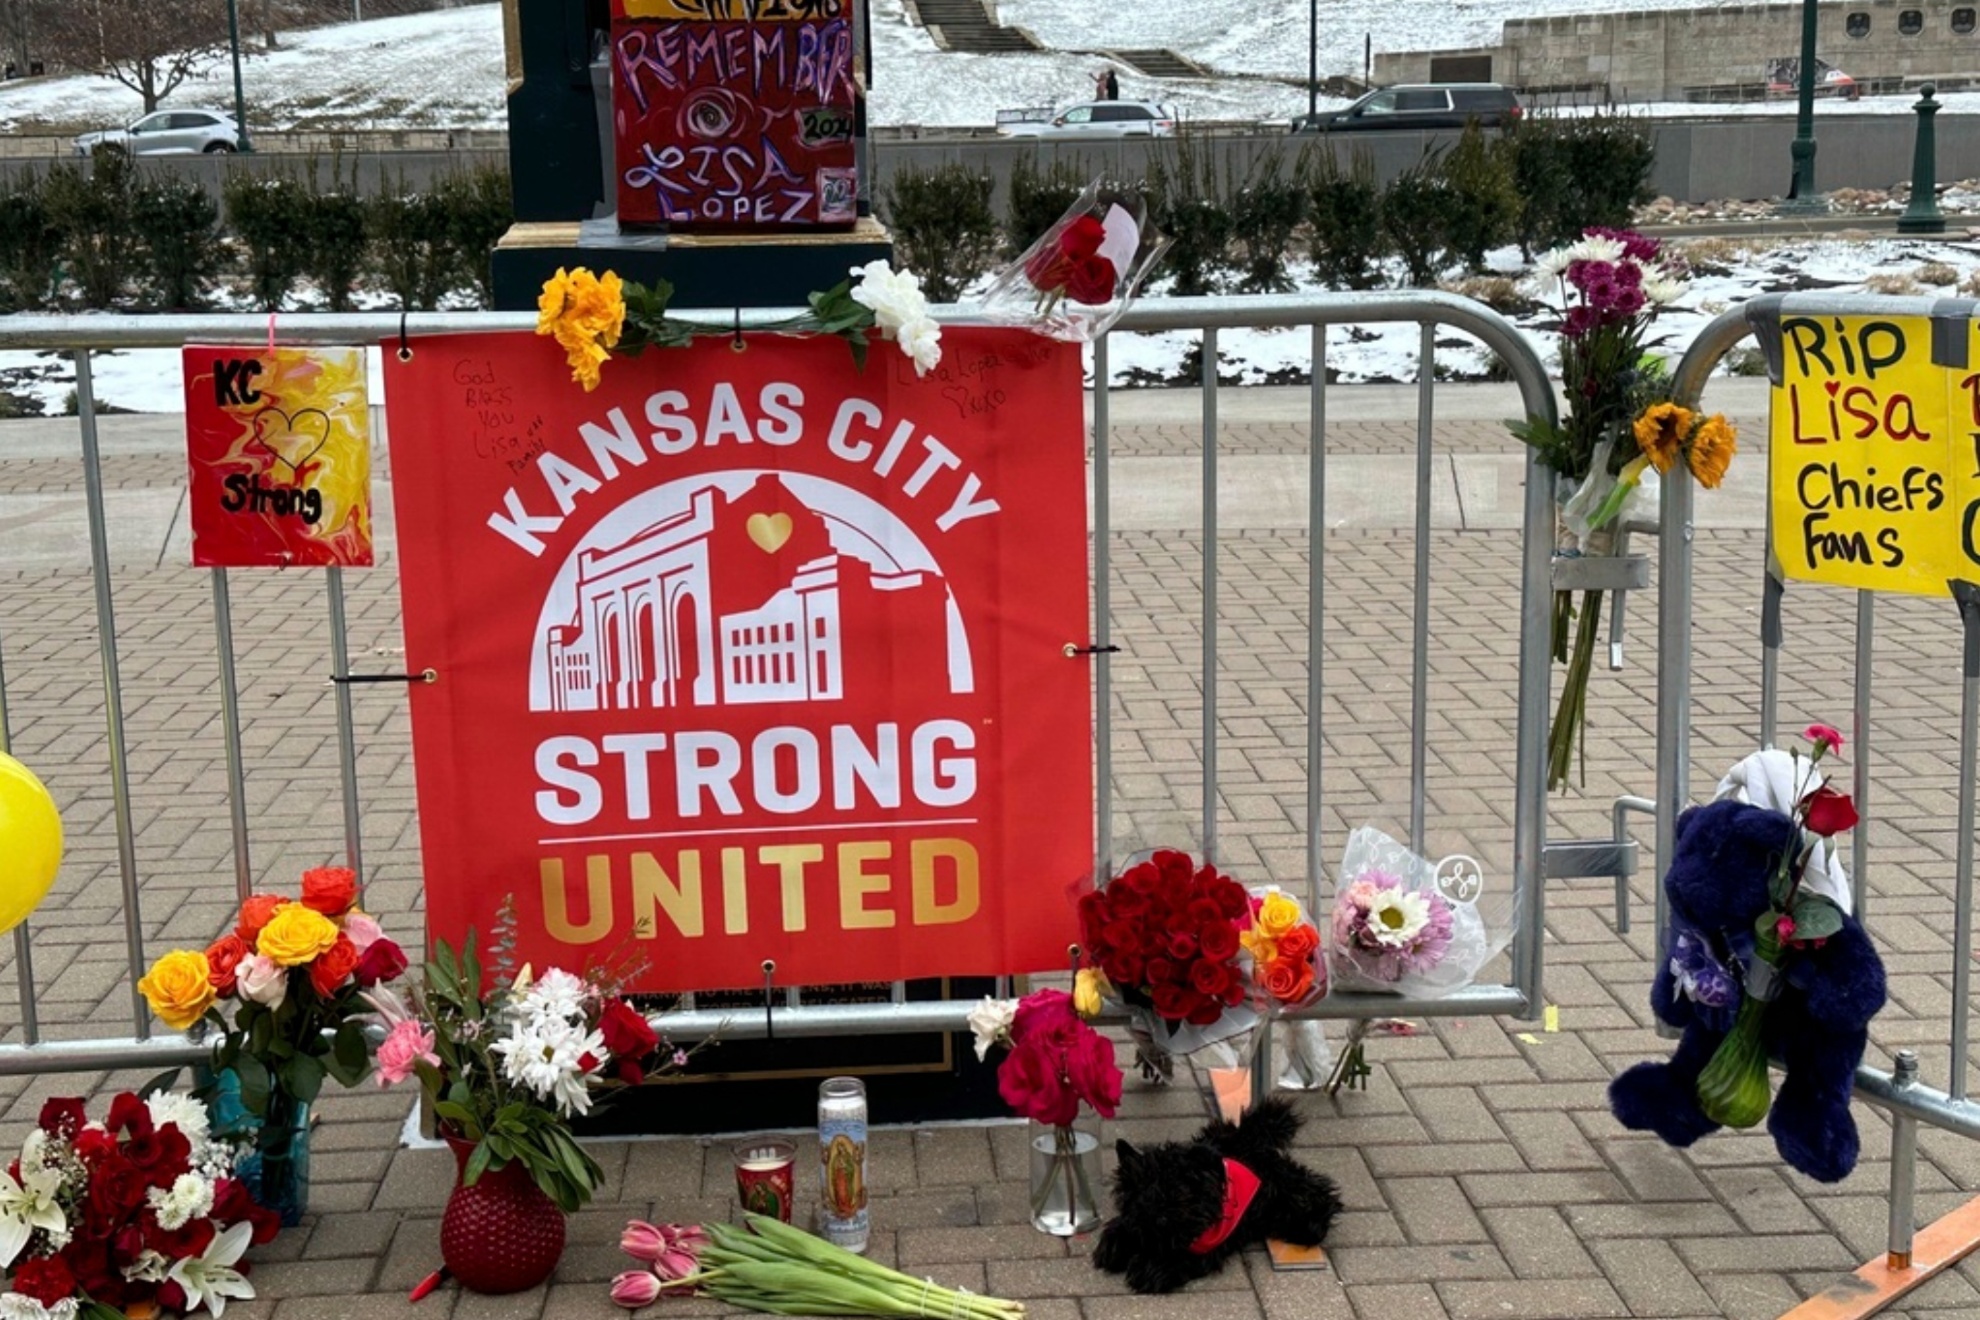 A 20- year-old old male has been charged in the Kansas City Chiefs parade shooting